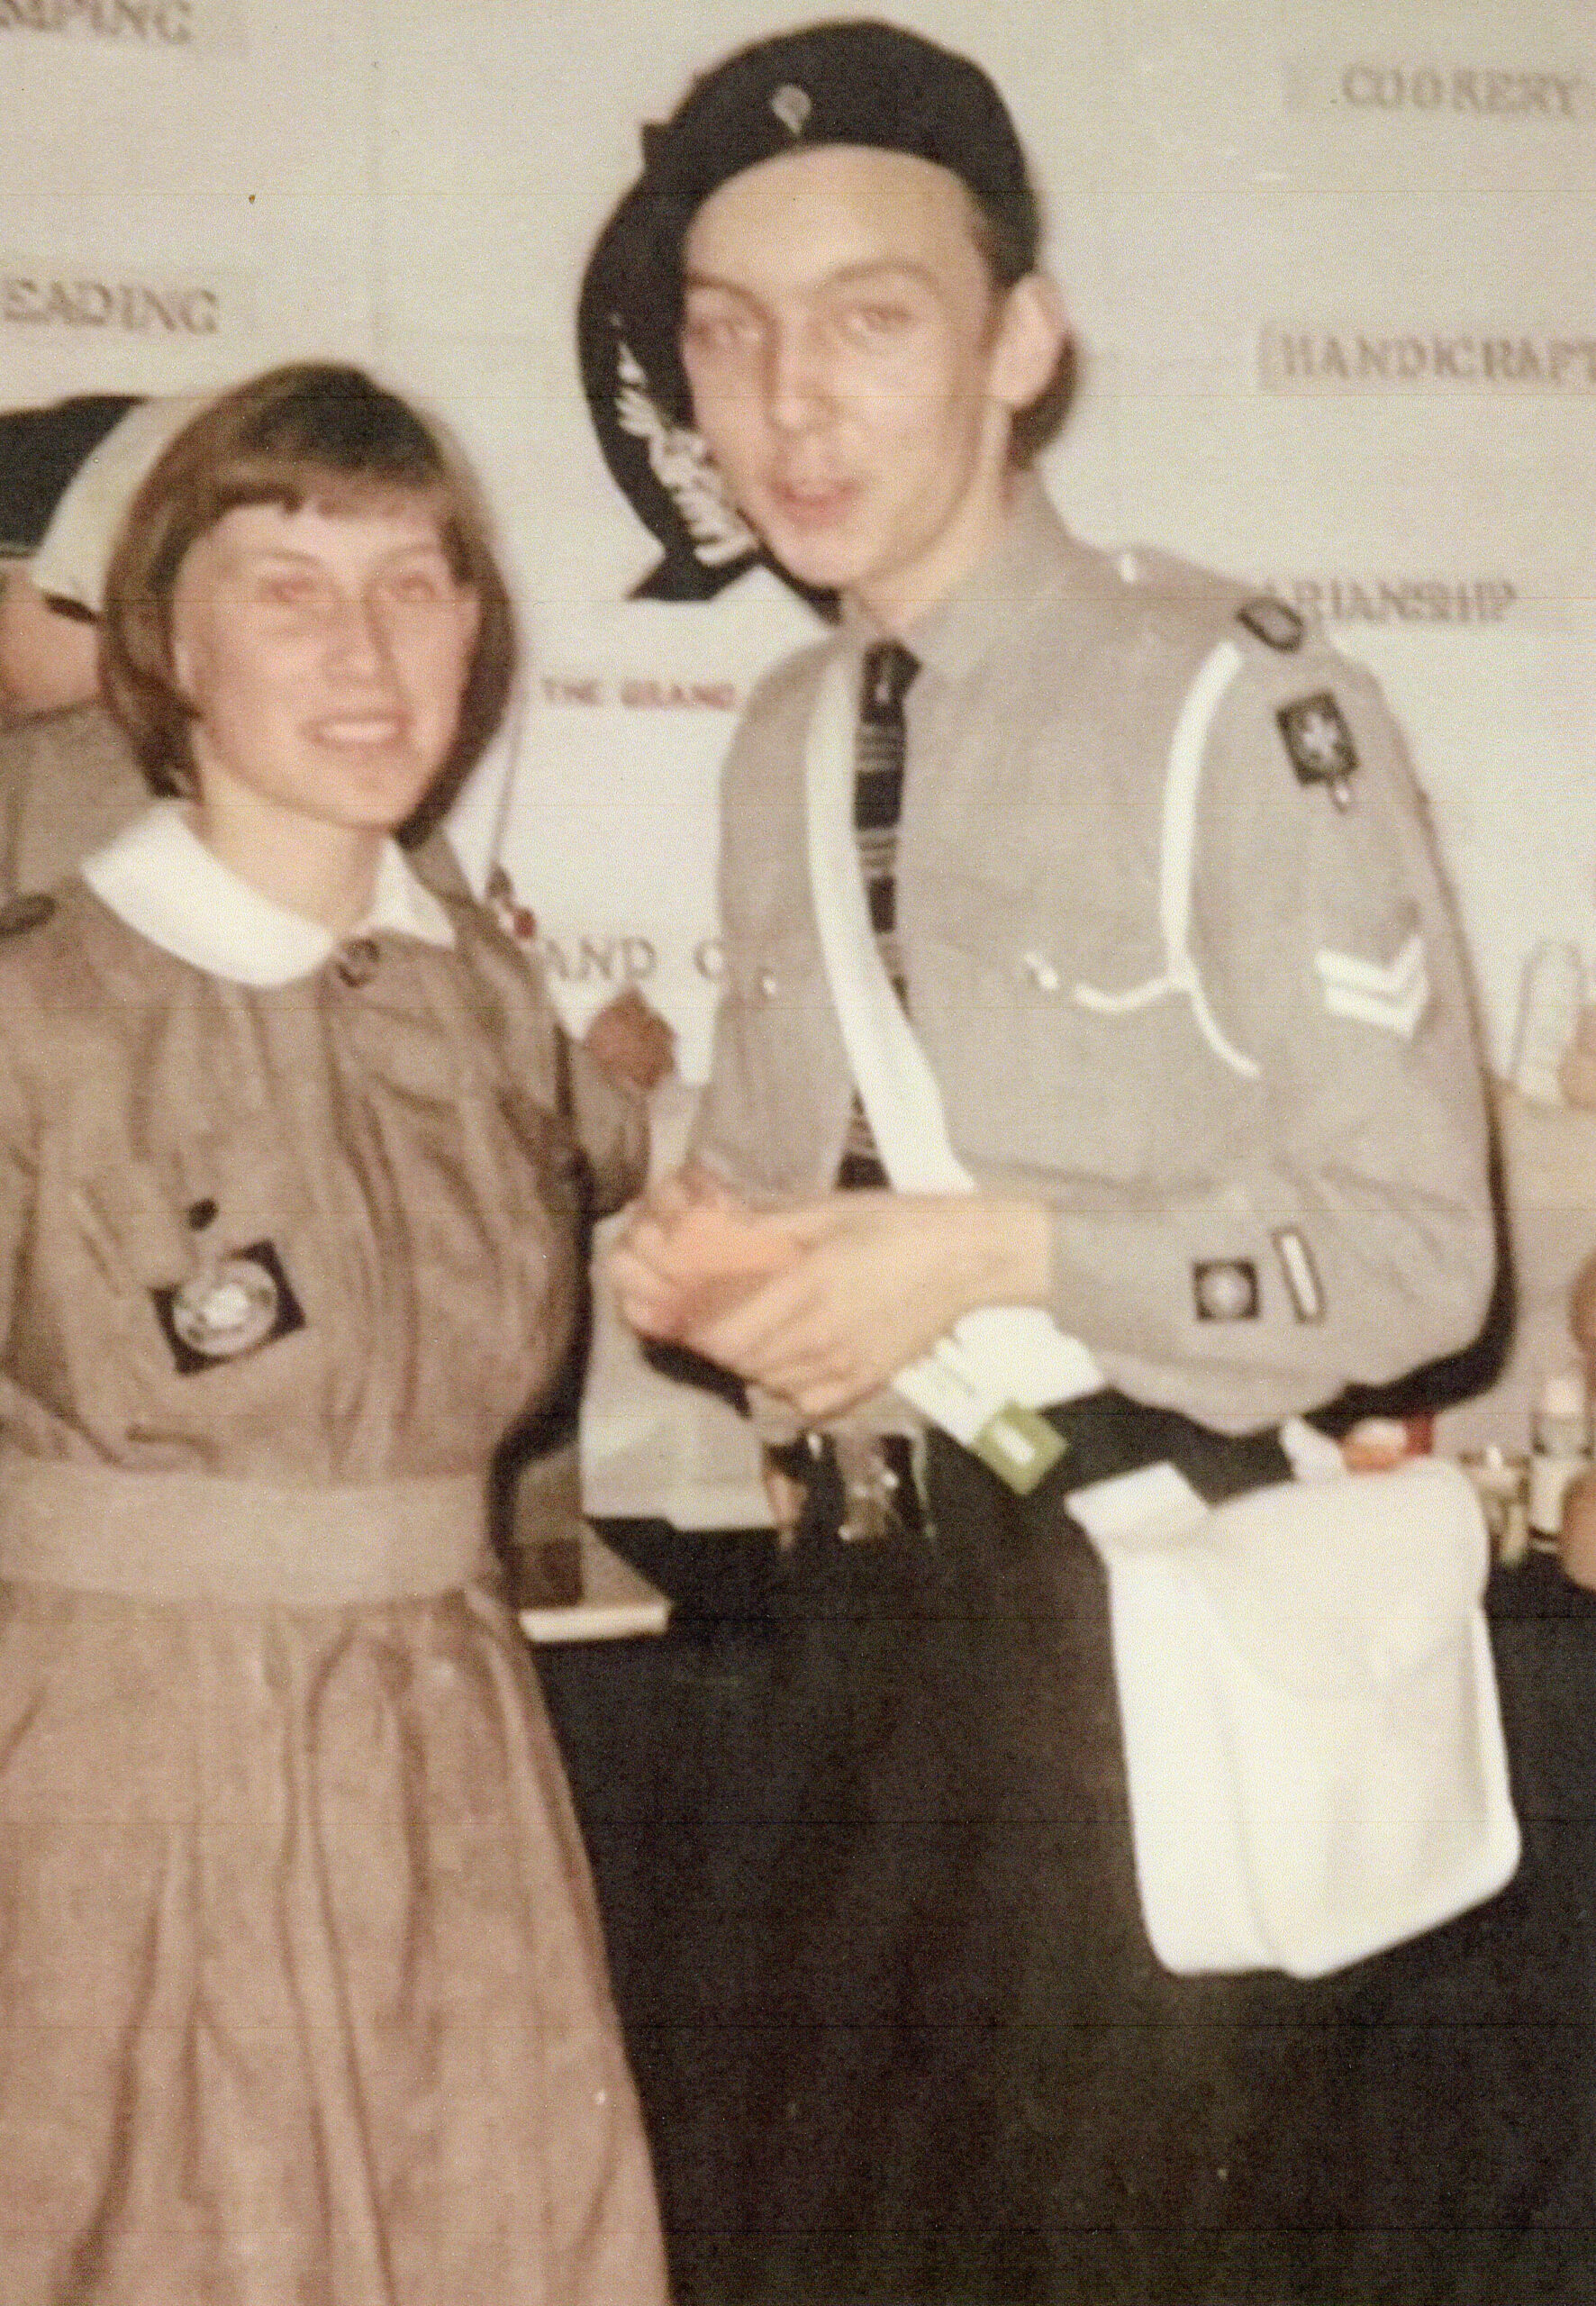 A faded photograph with a white Nursing Cadet on the left wearing a grey knee length dress with a white collar belted at the waist. The dress has a pocket on the chest with a black badge bearing St John’s 8 pointed cross. She is also wearing a white nursing cap towards the back of her head. To the right of the photo is a white male Cadet wearing a black beret